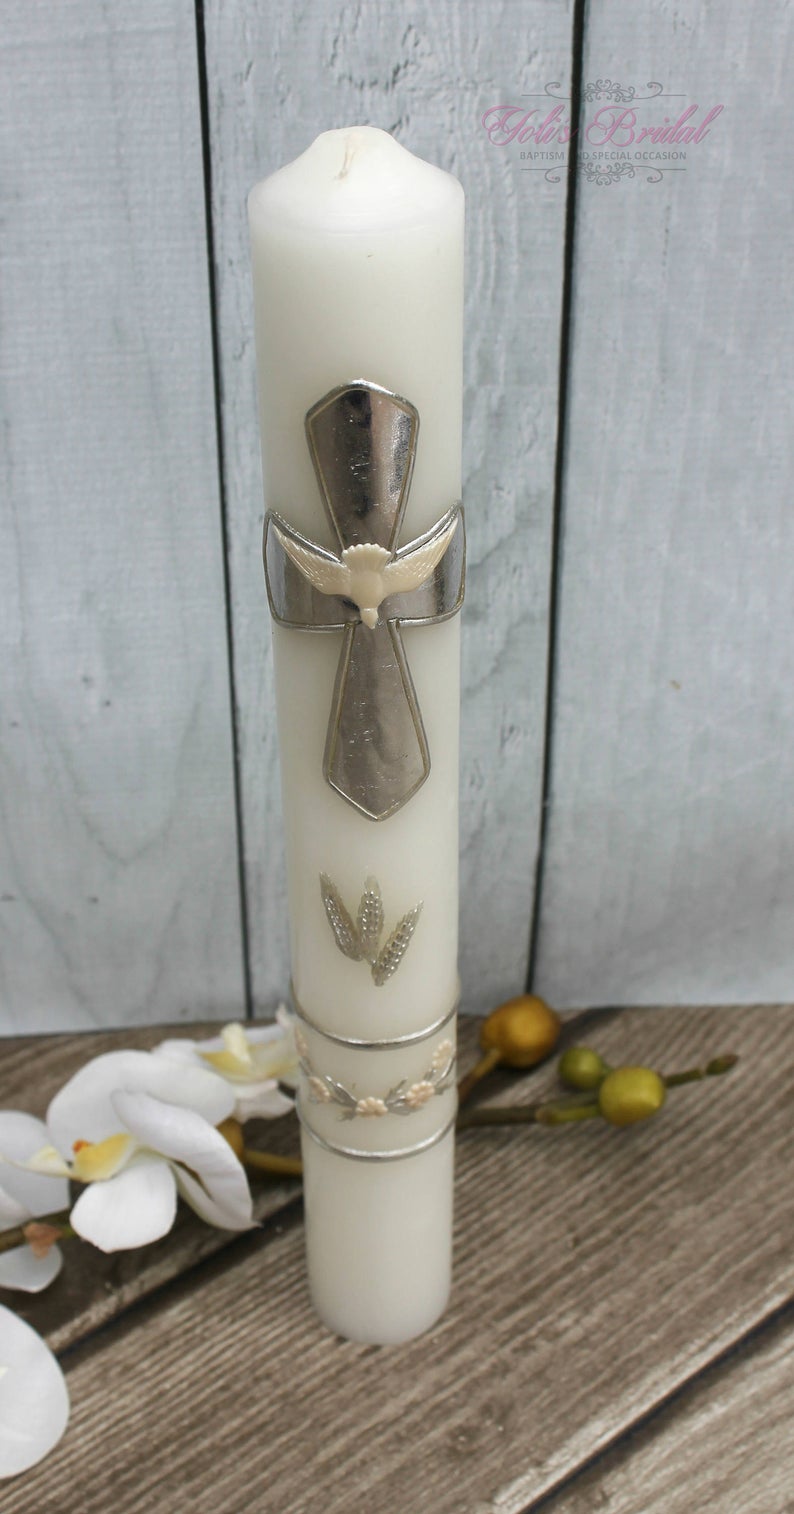 FAST SHIPPING Beautiful Silver Candle for any occasion